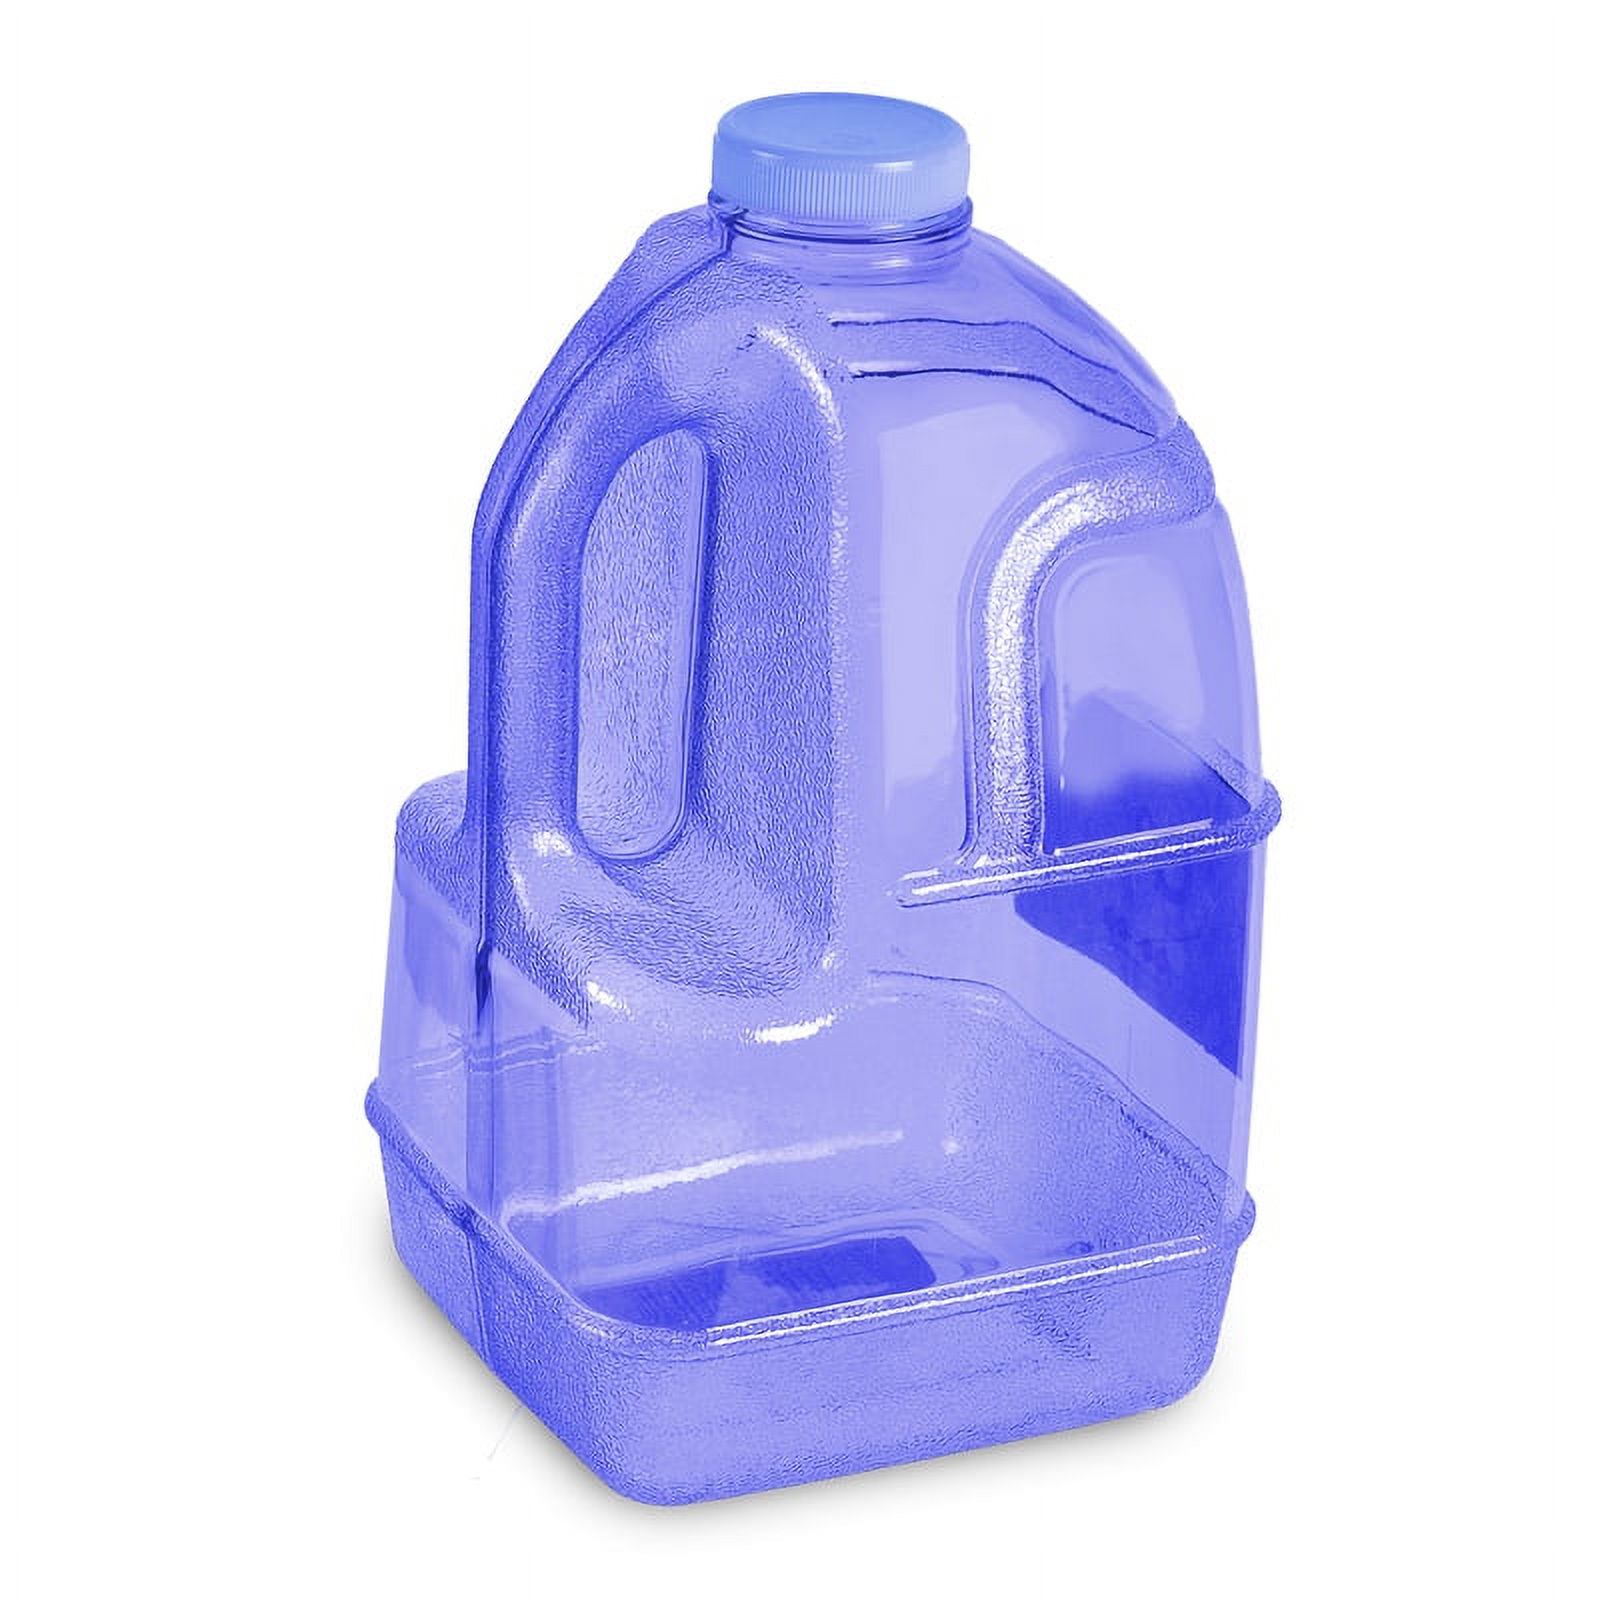 1 Gallon BPA FREE Reusable Plastic Drinking Water Big Mouth "Dairy" Bottle Jug Container with Holder - Dark Blue - image 1 of 5